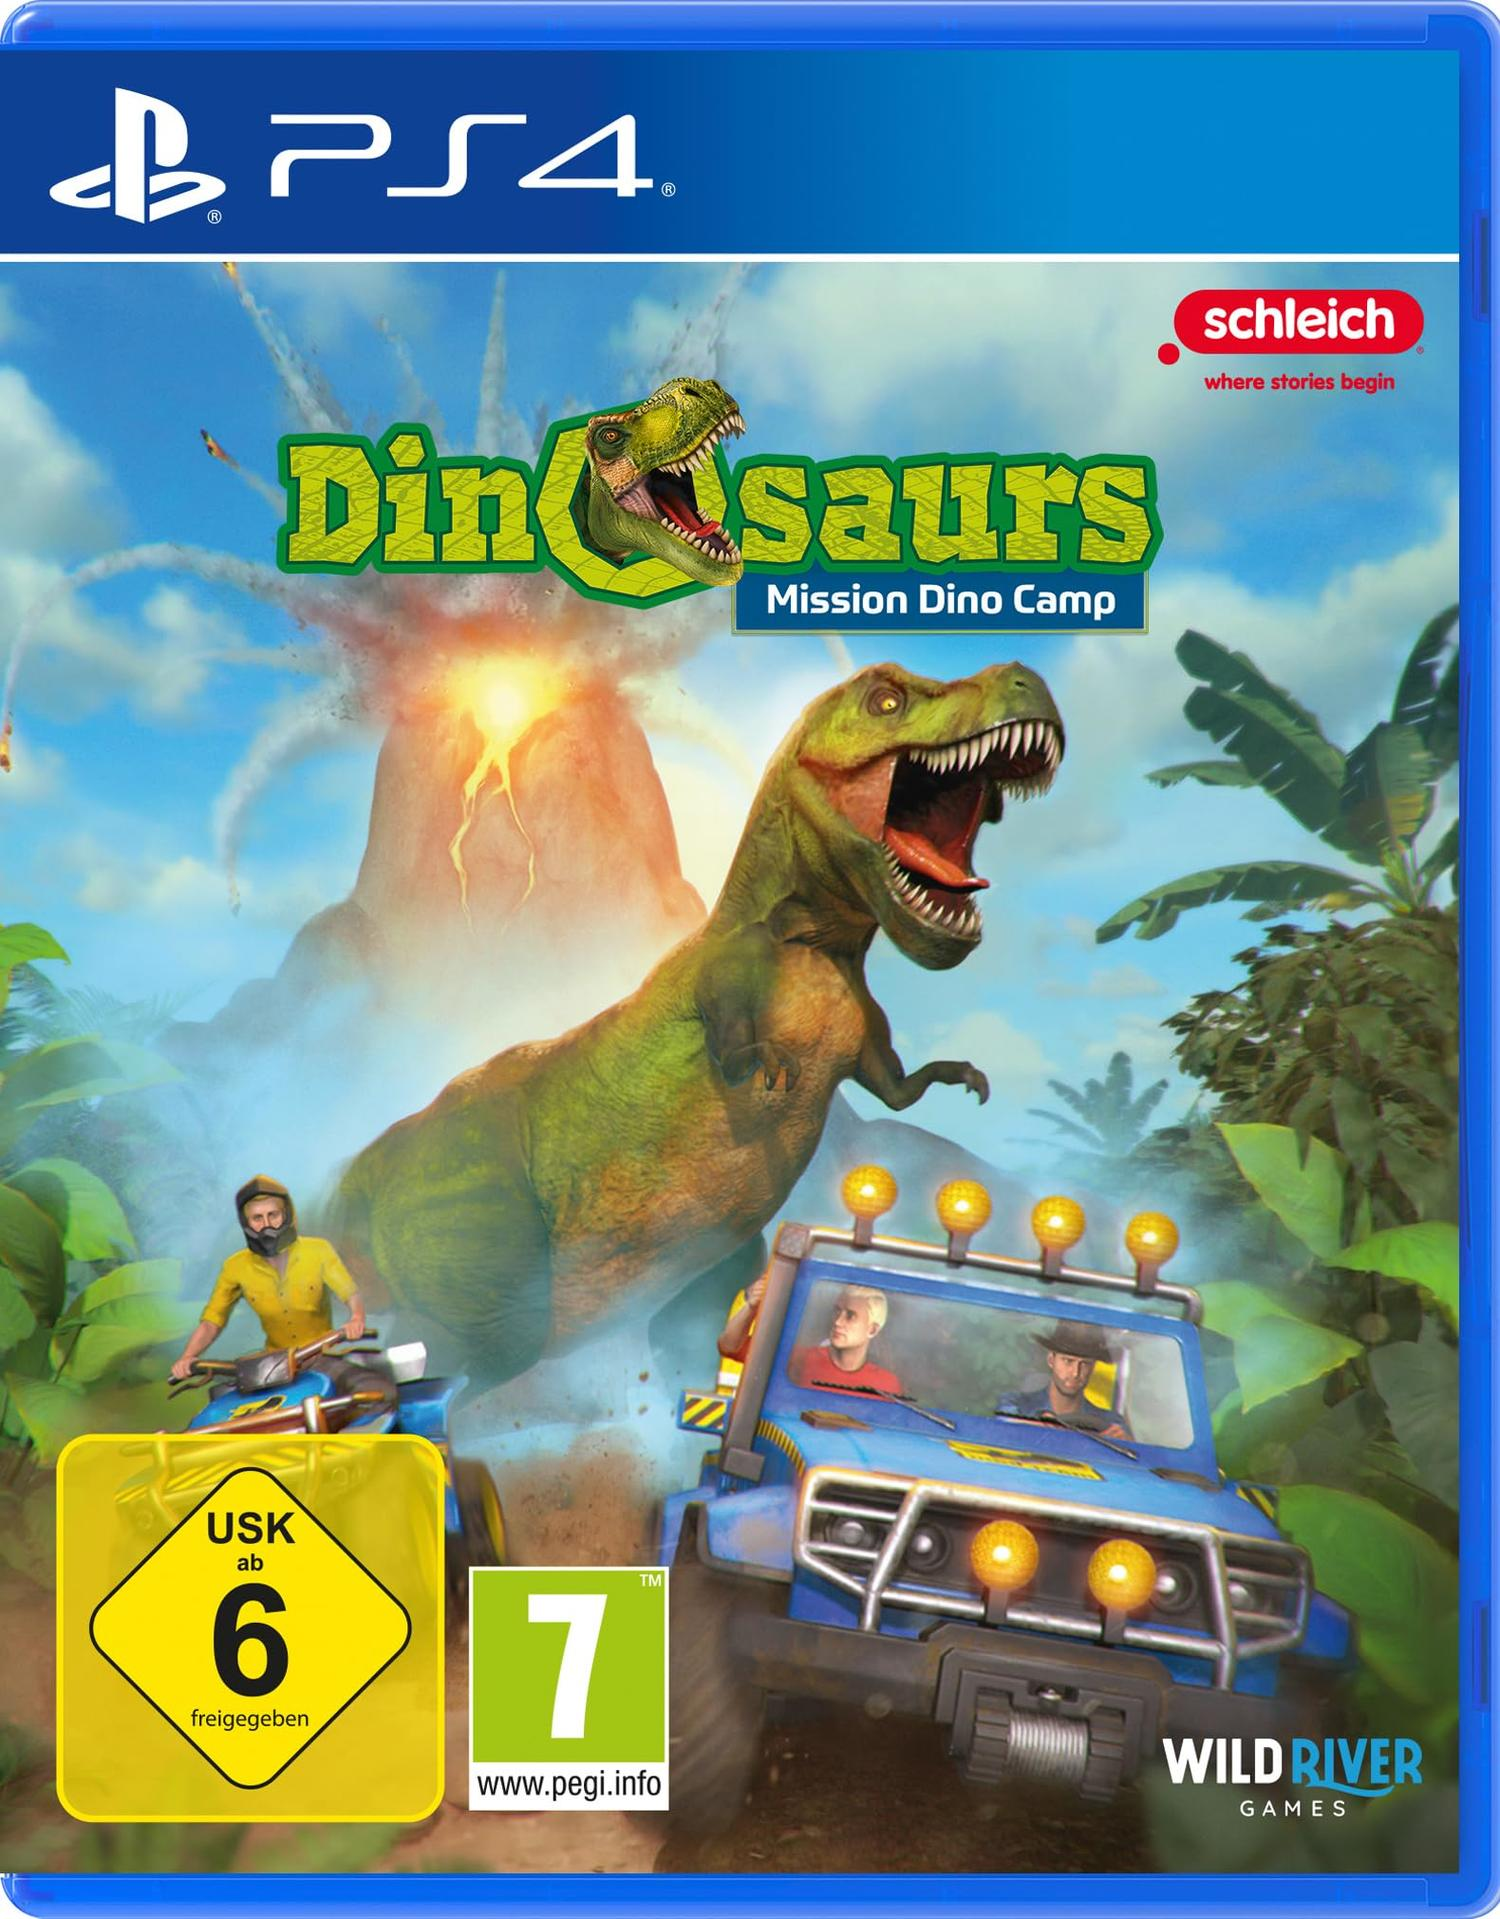 - Mission PS4 Camp Dinosaurs 4] Dino Schleich [PlayStation